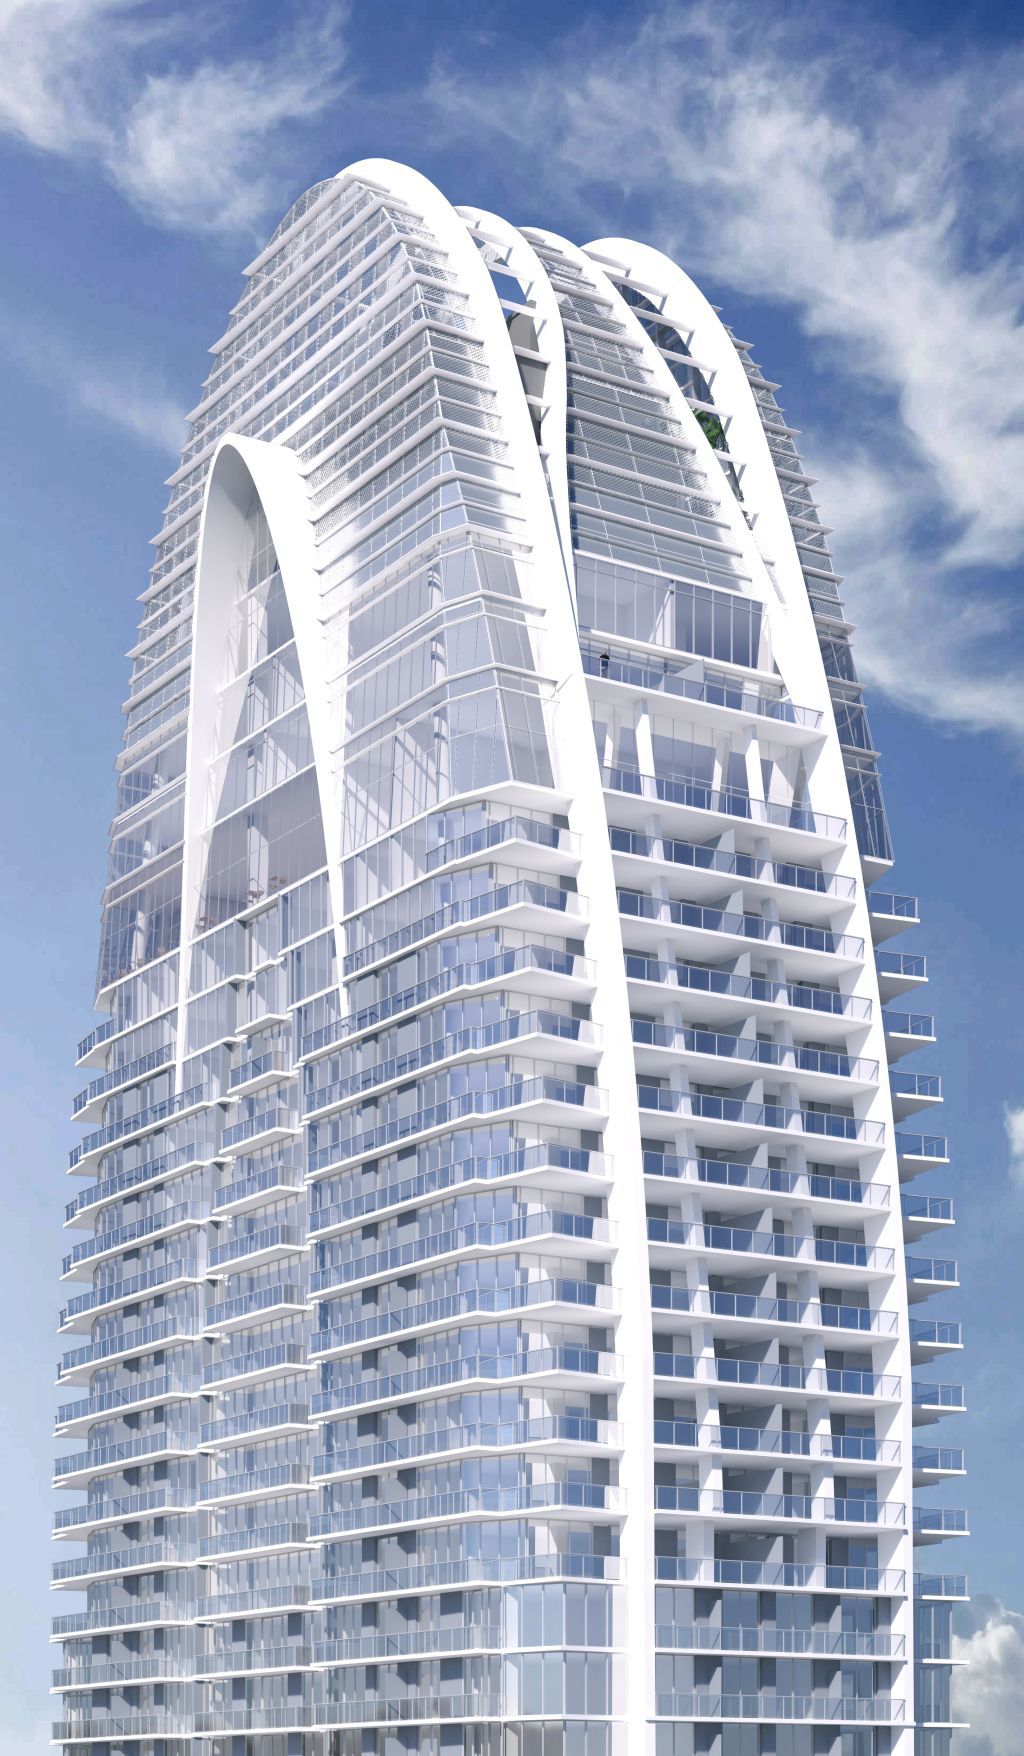 The Tallest Residential Building in Miamis Edgewater 